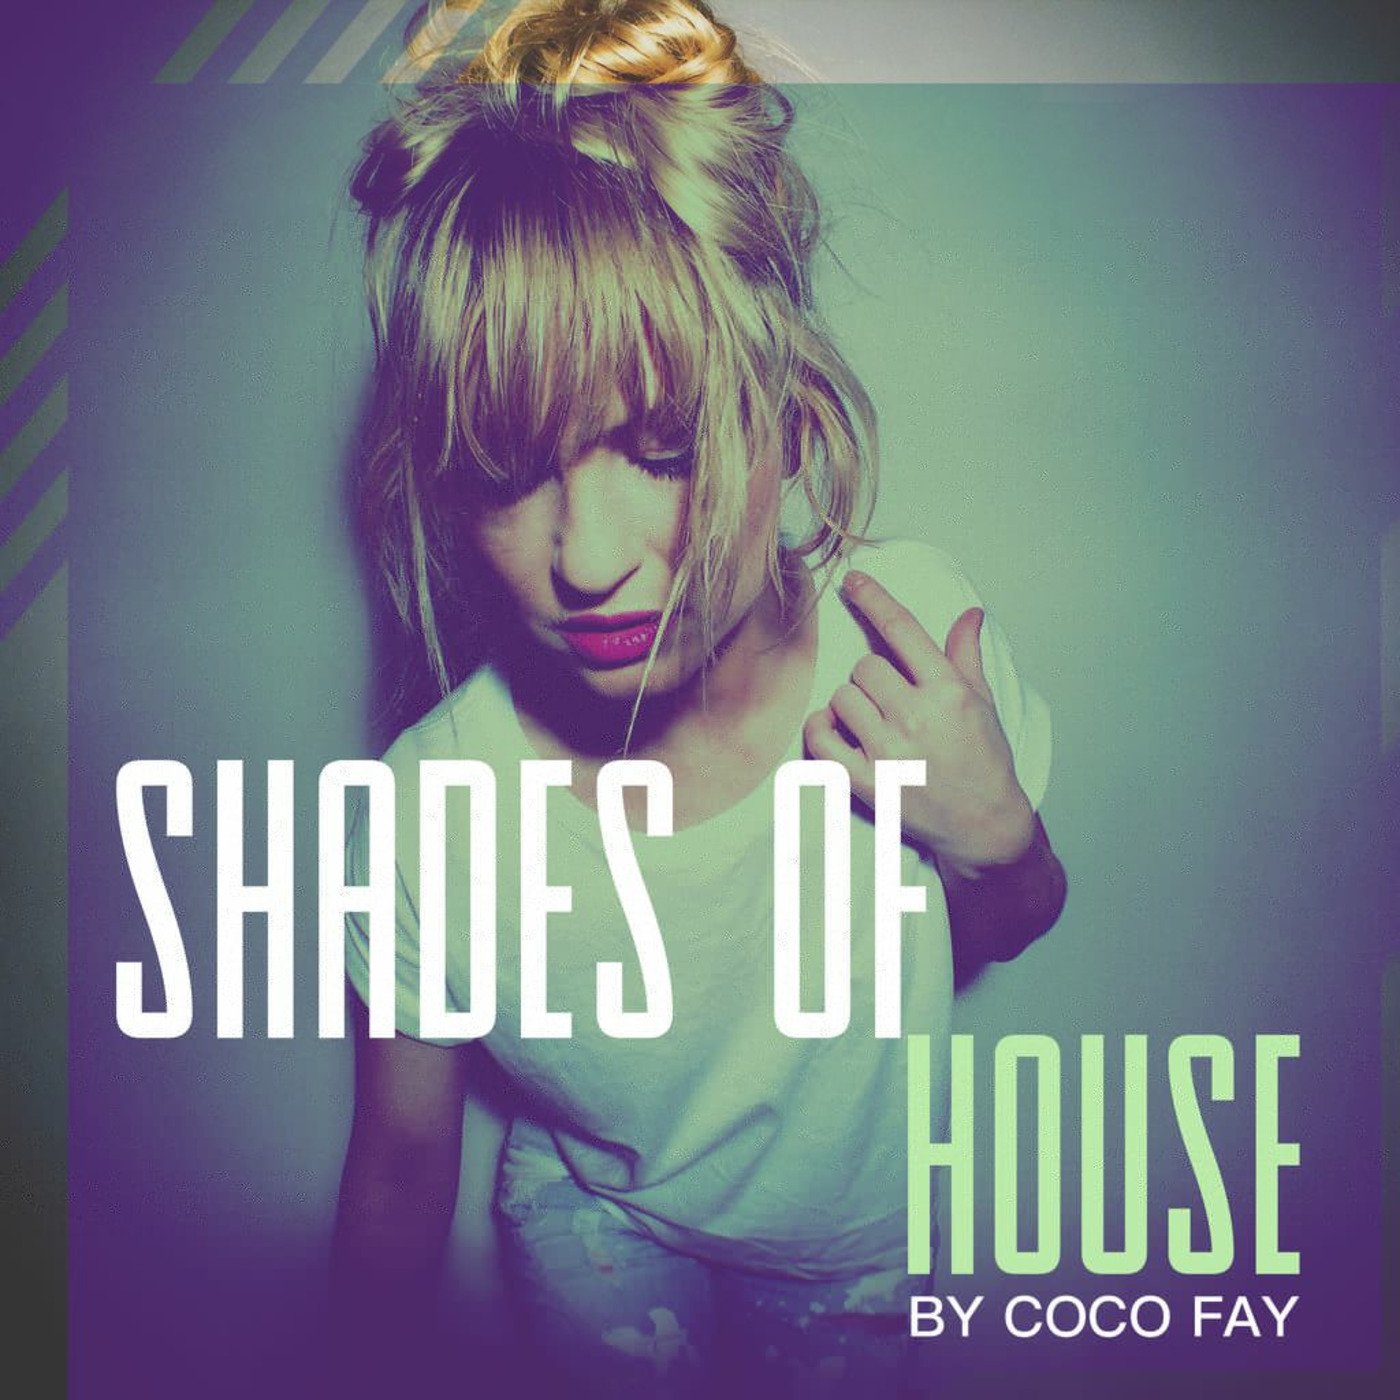 Shades of House #19 by Coco Fay